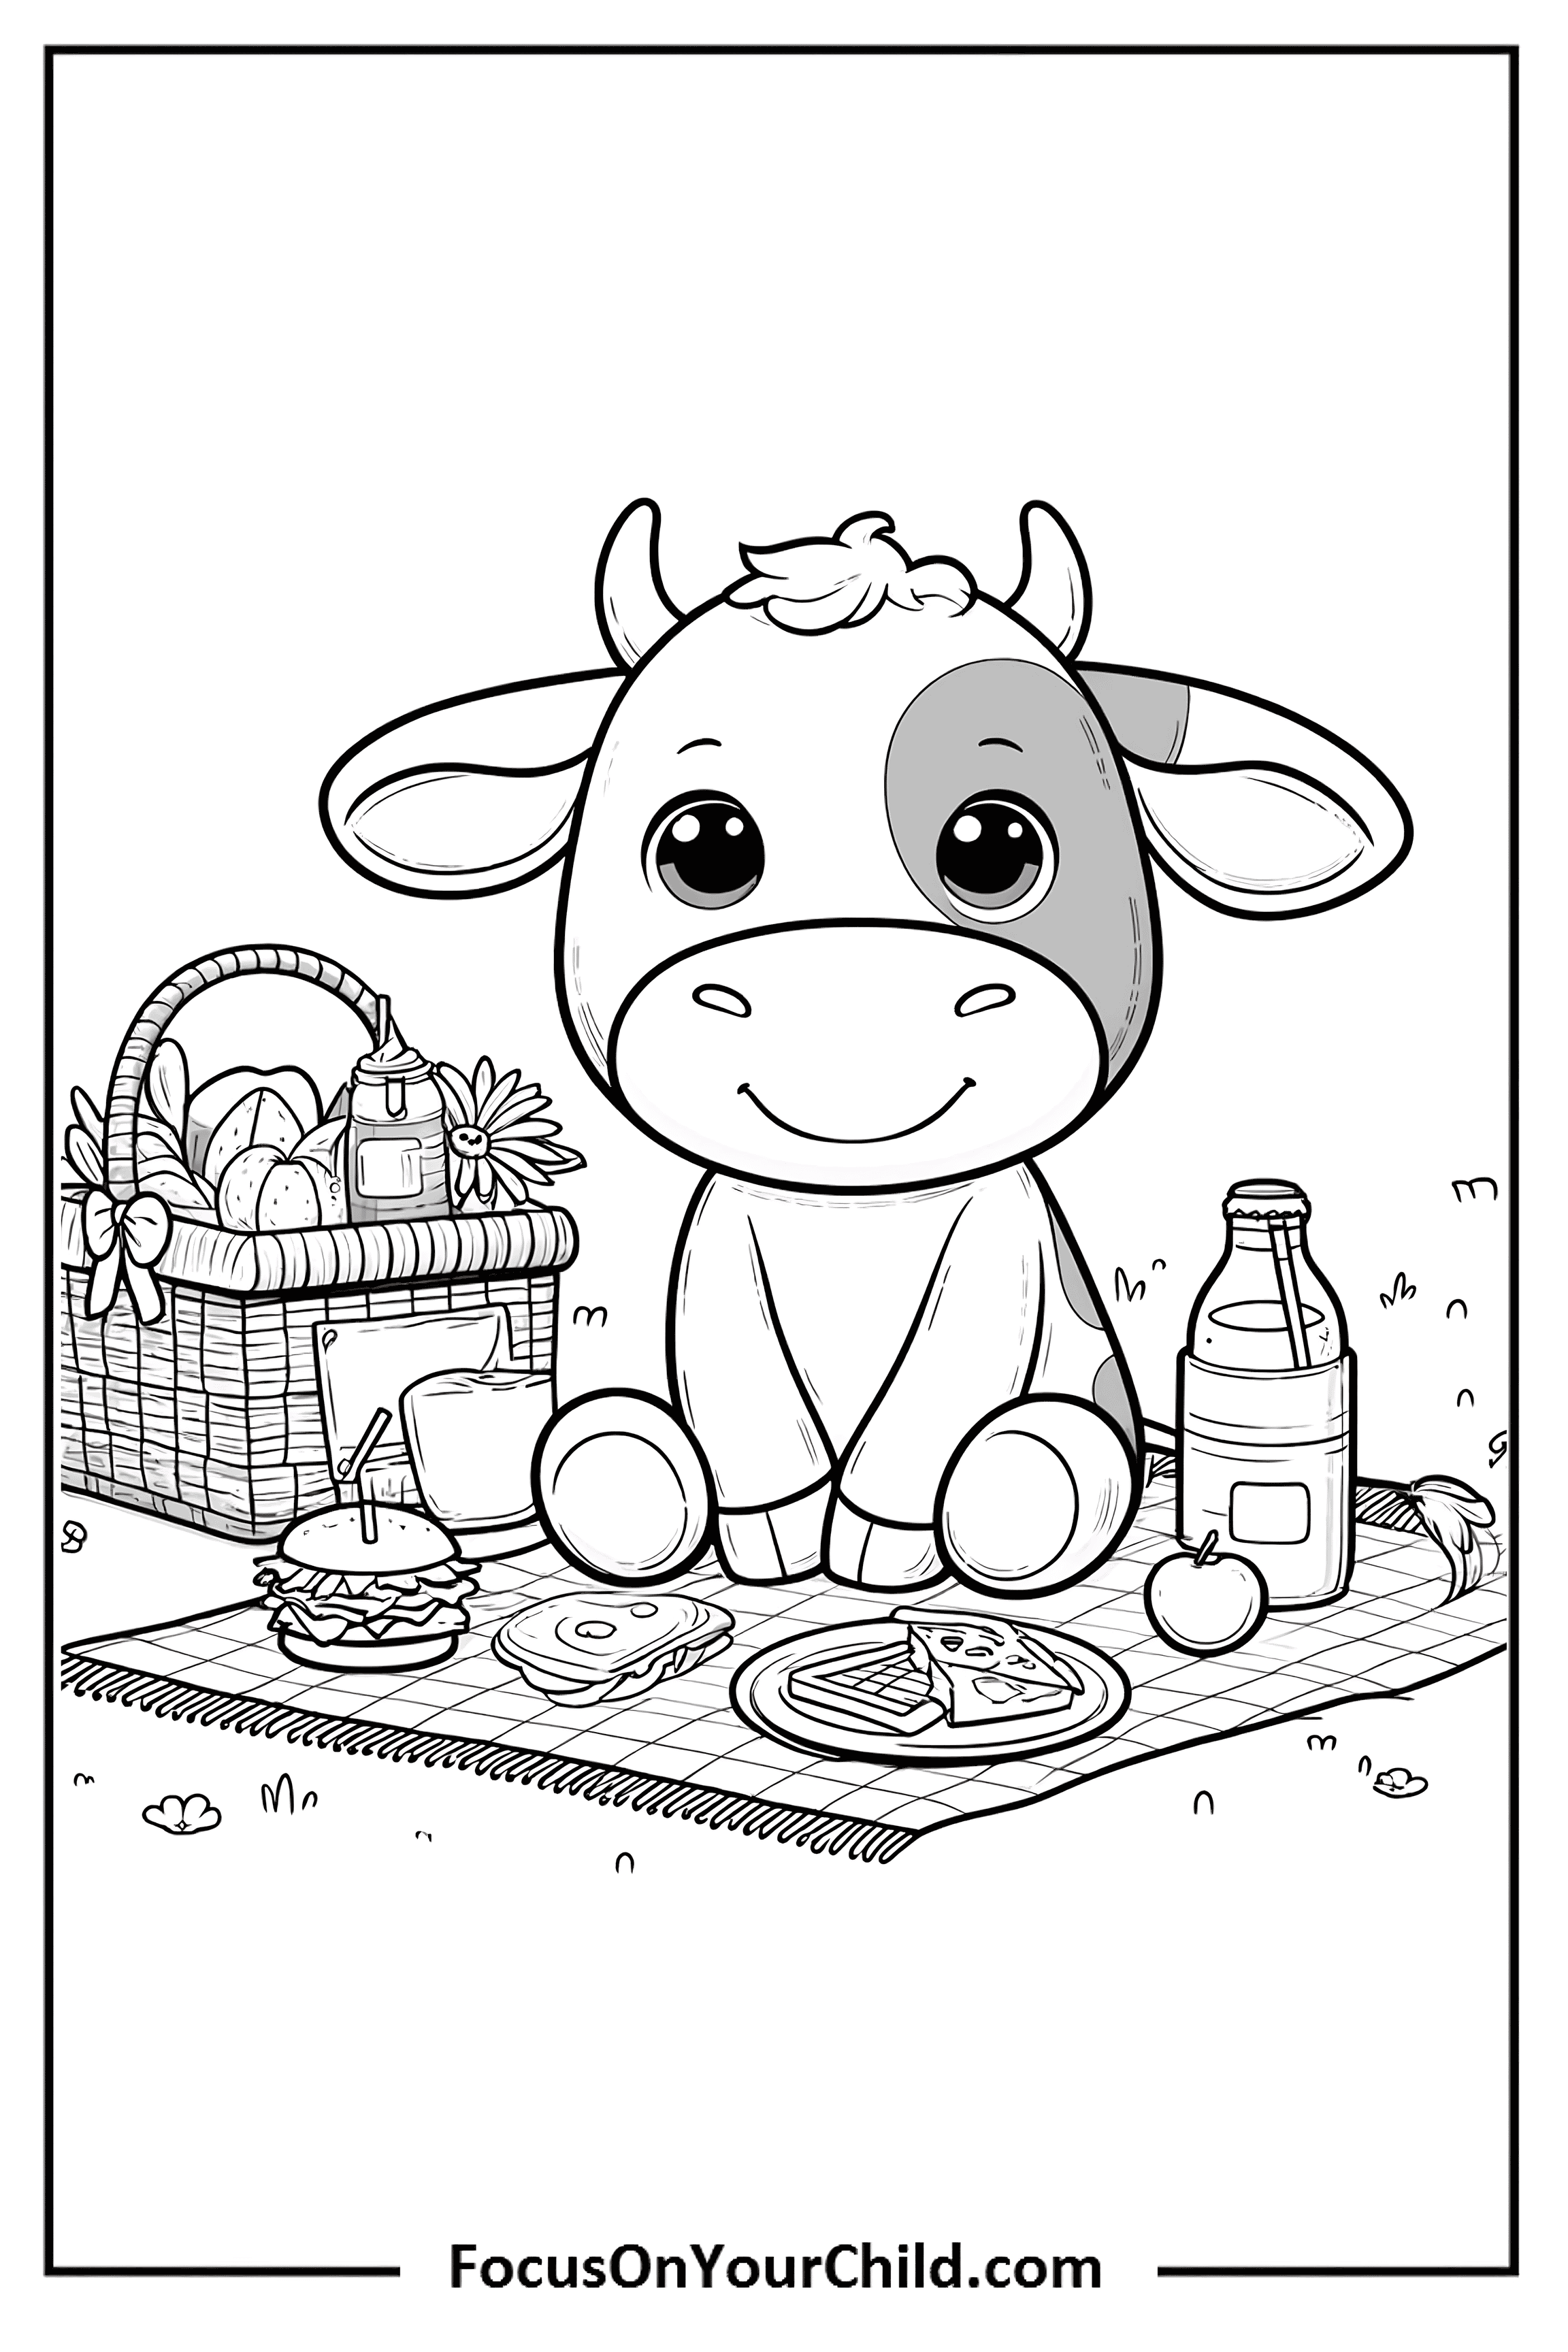 Charming baby cow enjoying a picnic on a checkered blanket in a grassy area.